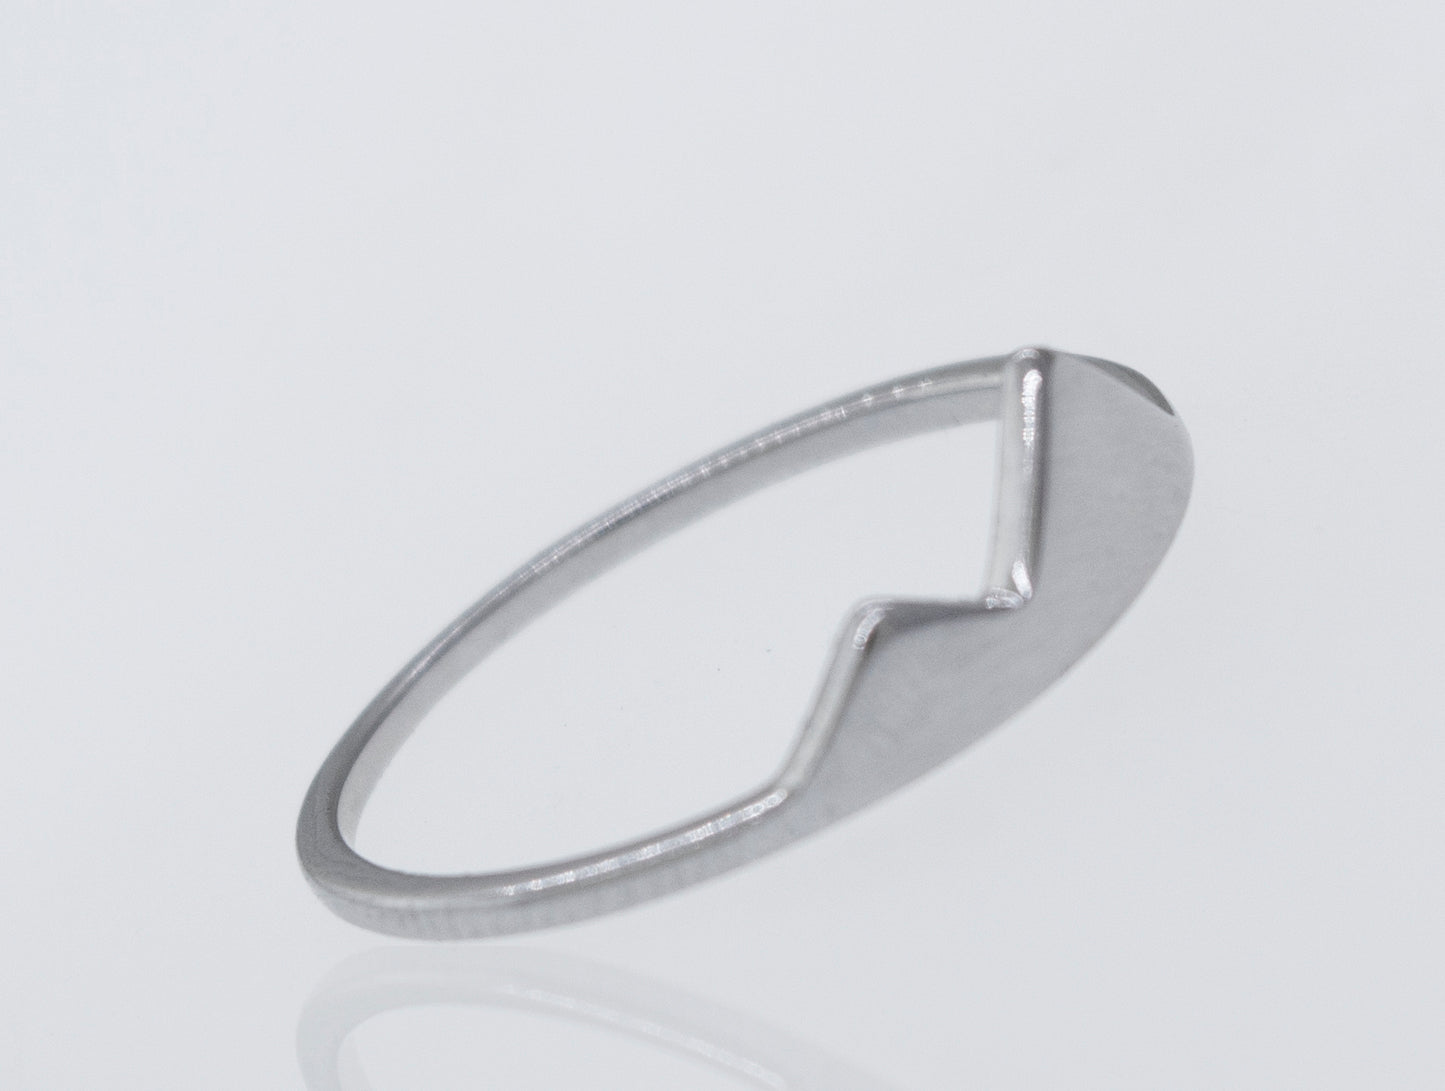 A Super Silver Mountain Ring with a curved shape, made of sterling silver.